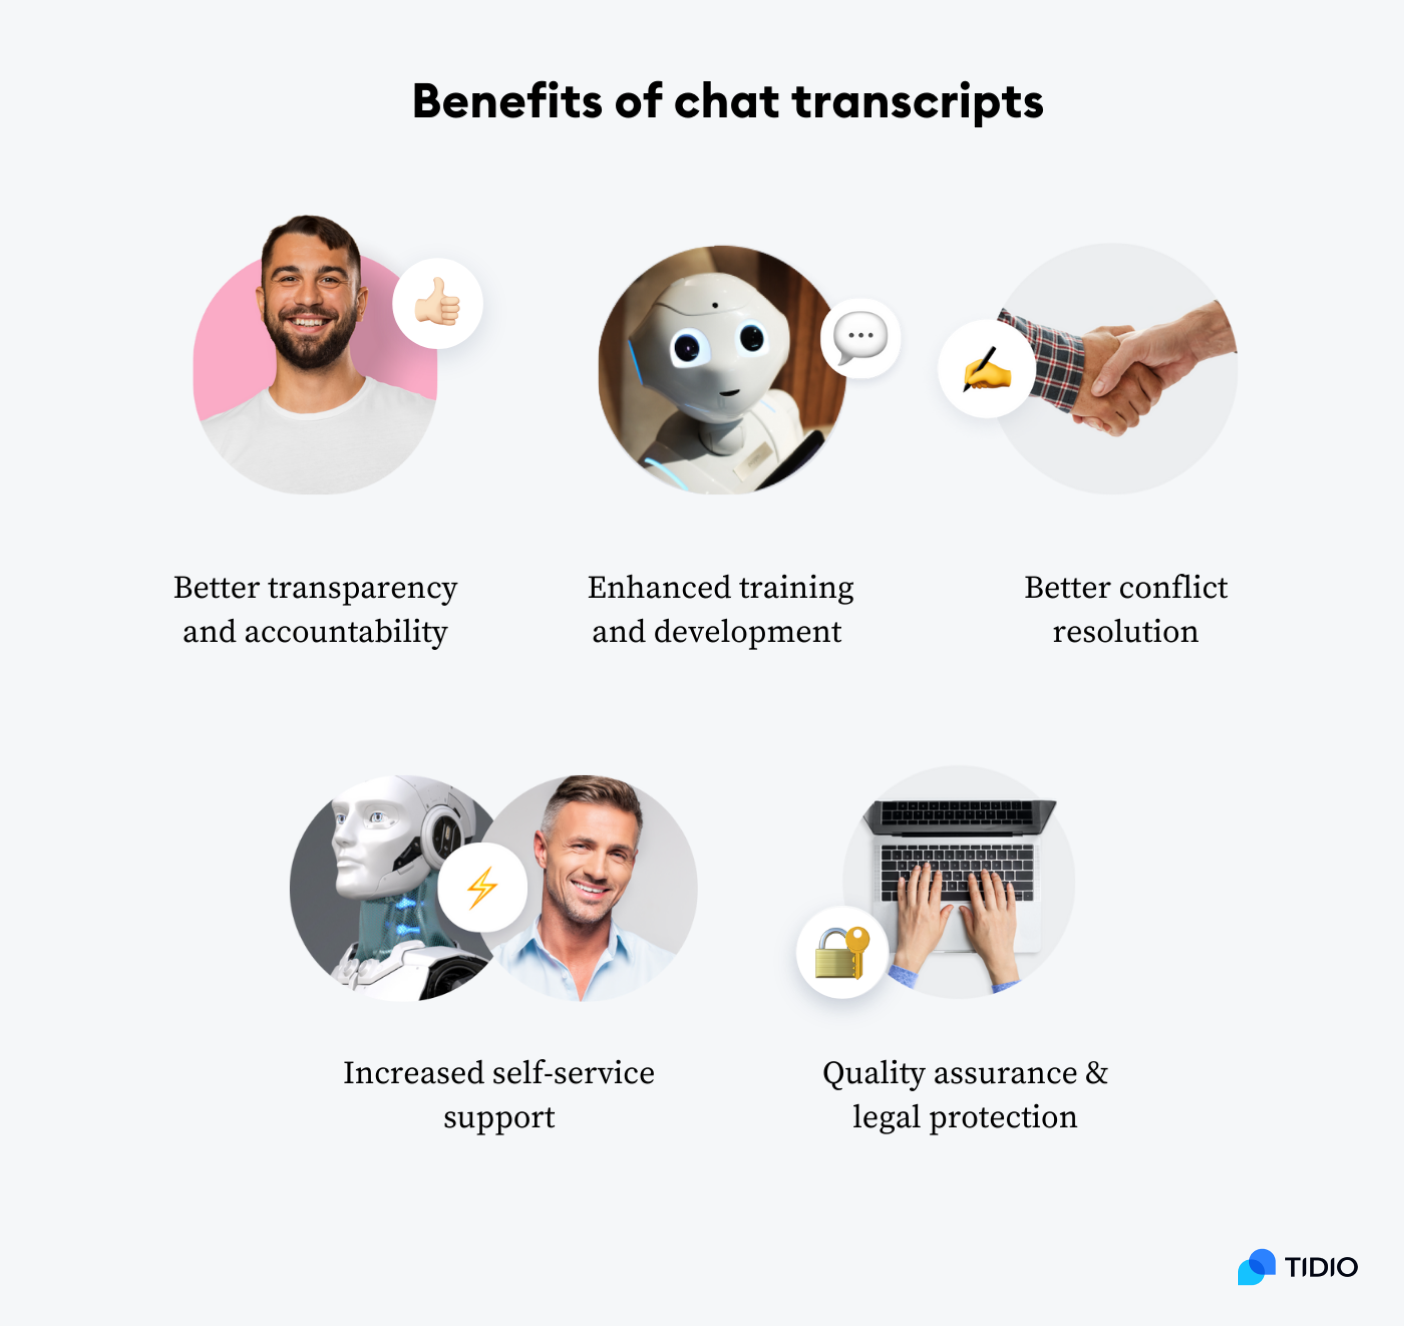 benefits of chat transcripts on image